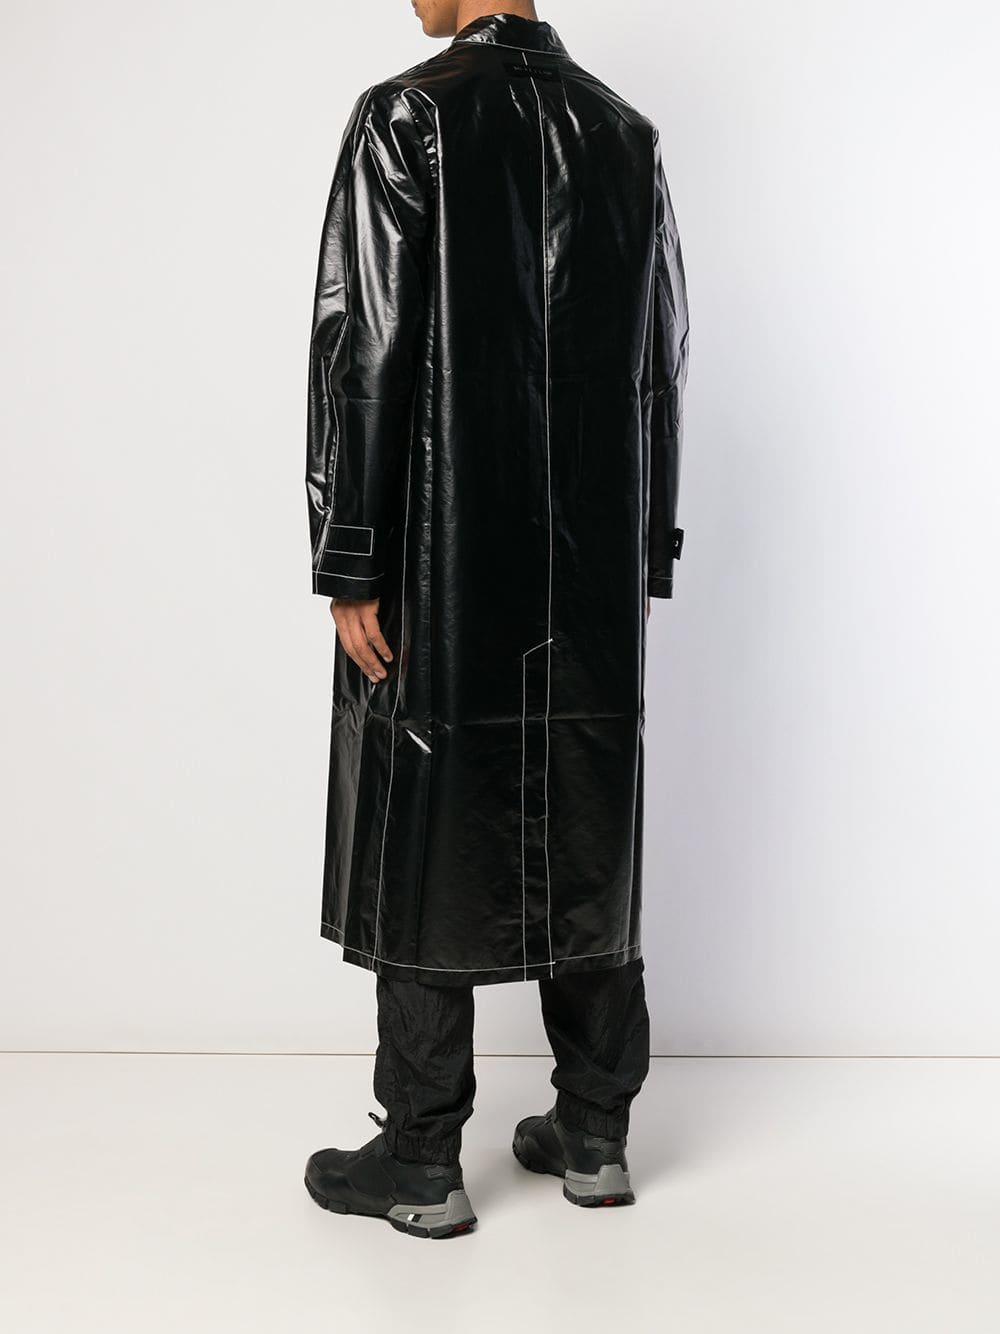 1017 ALYX 9SM Mid-length Faux Leather Trench Coat in Black for Men - Lyst